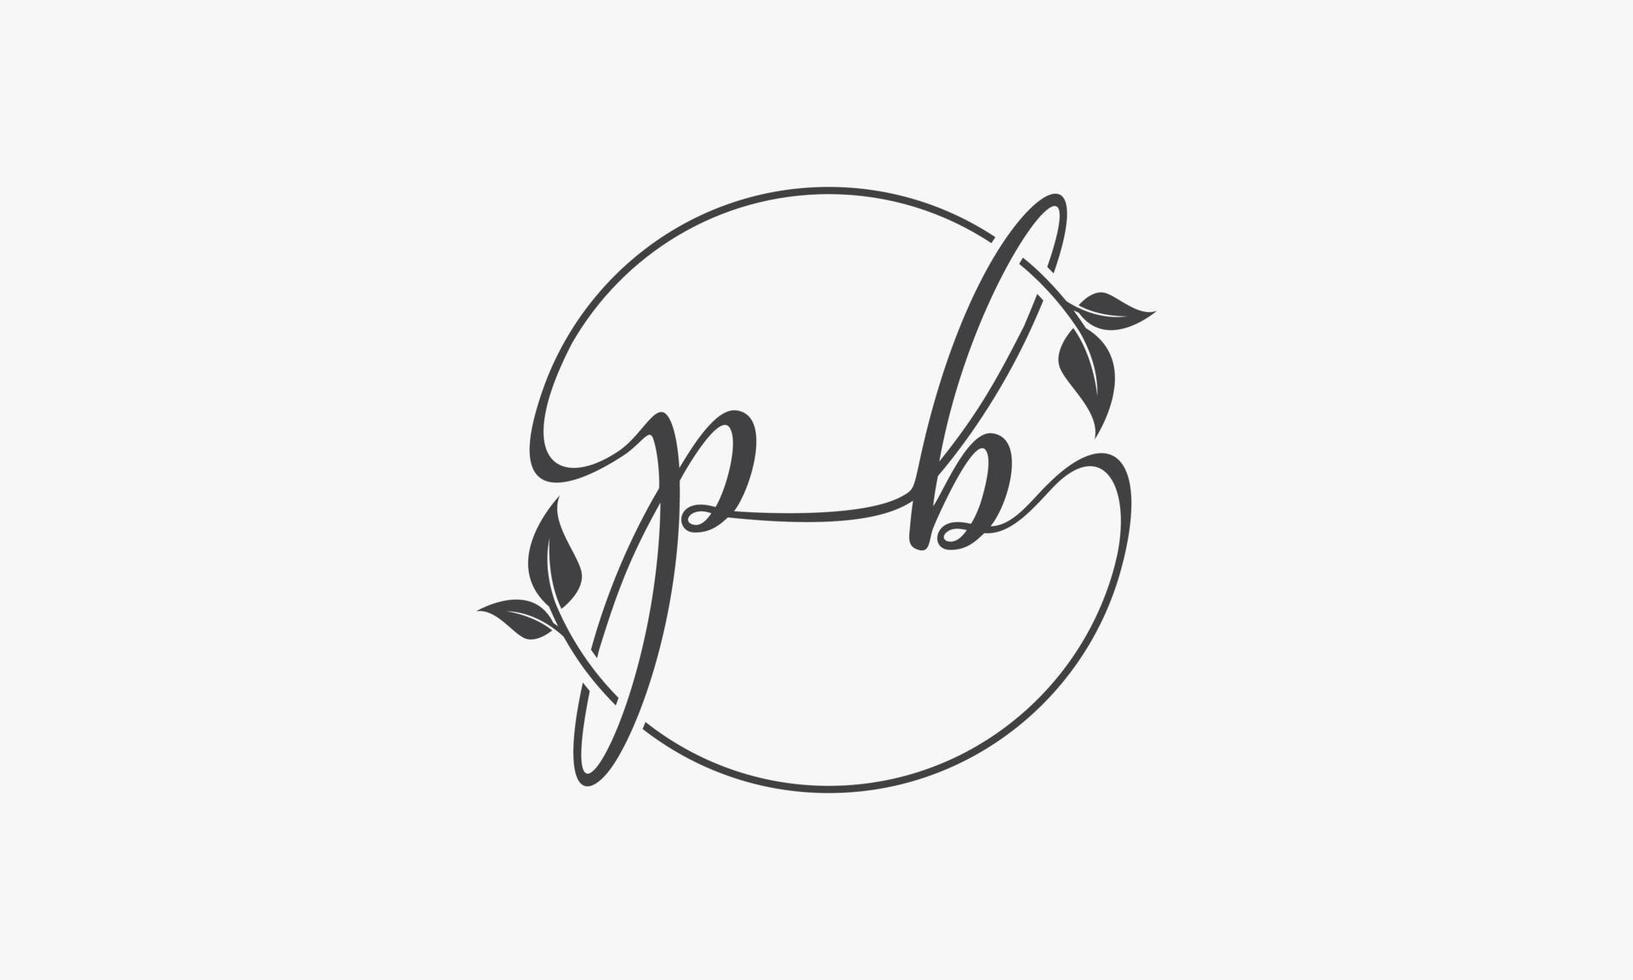 P B letter handwriting circle leaf graphic logo concept. vector